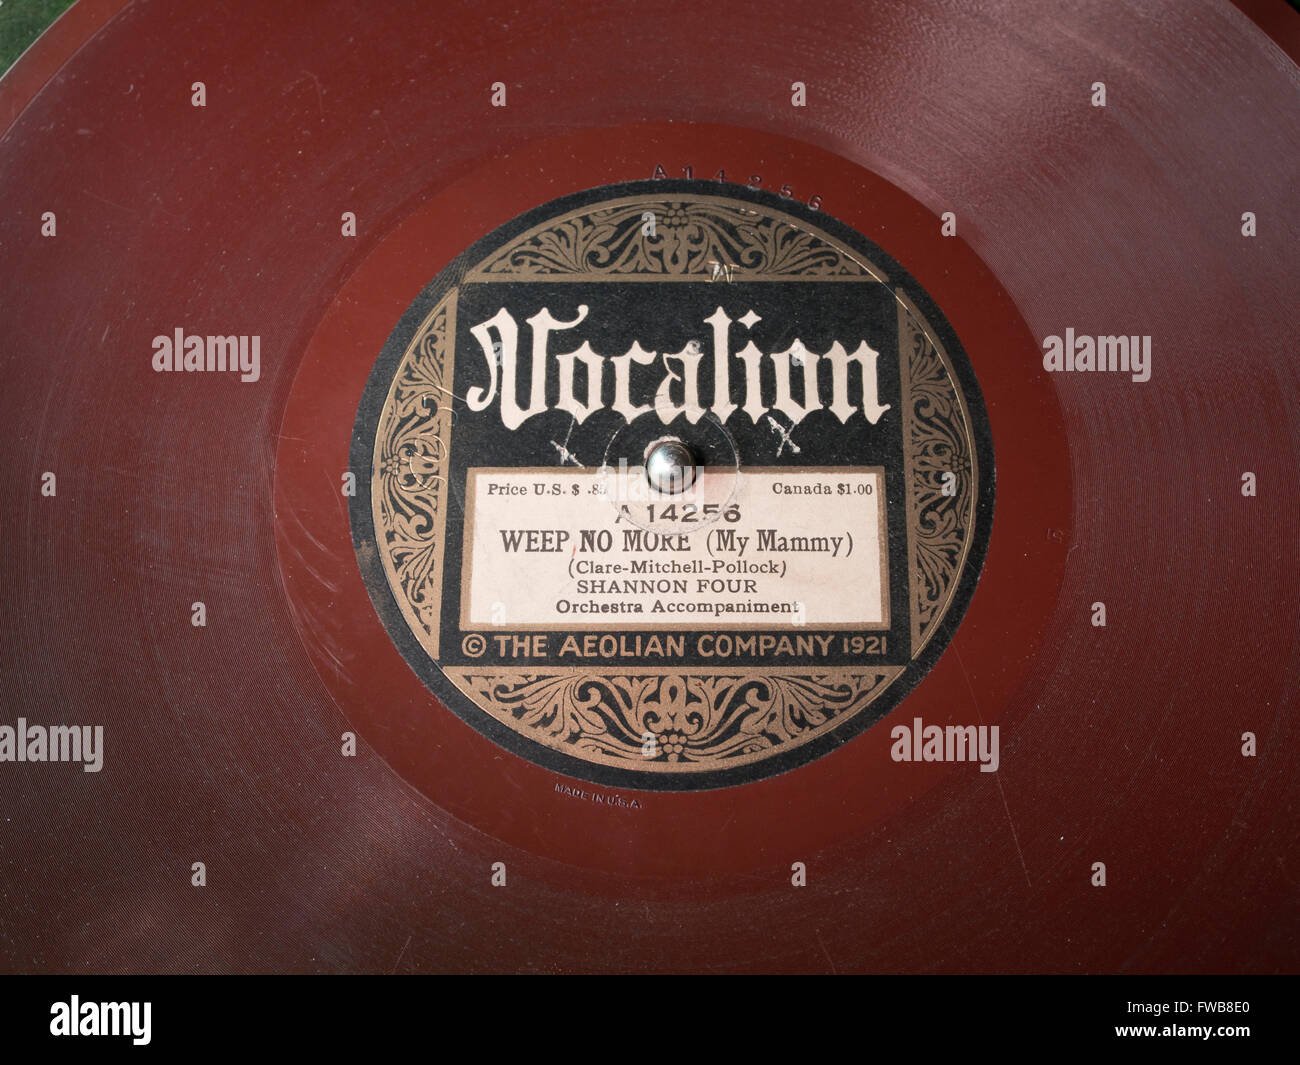 Weep no more (my mammy)  sung by the Shannon Four on a brown shellac record in 1921, Vocalion The Aeolian Company label Stock Photo